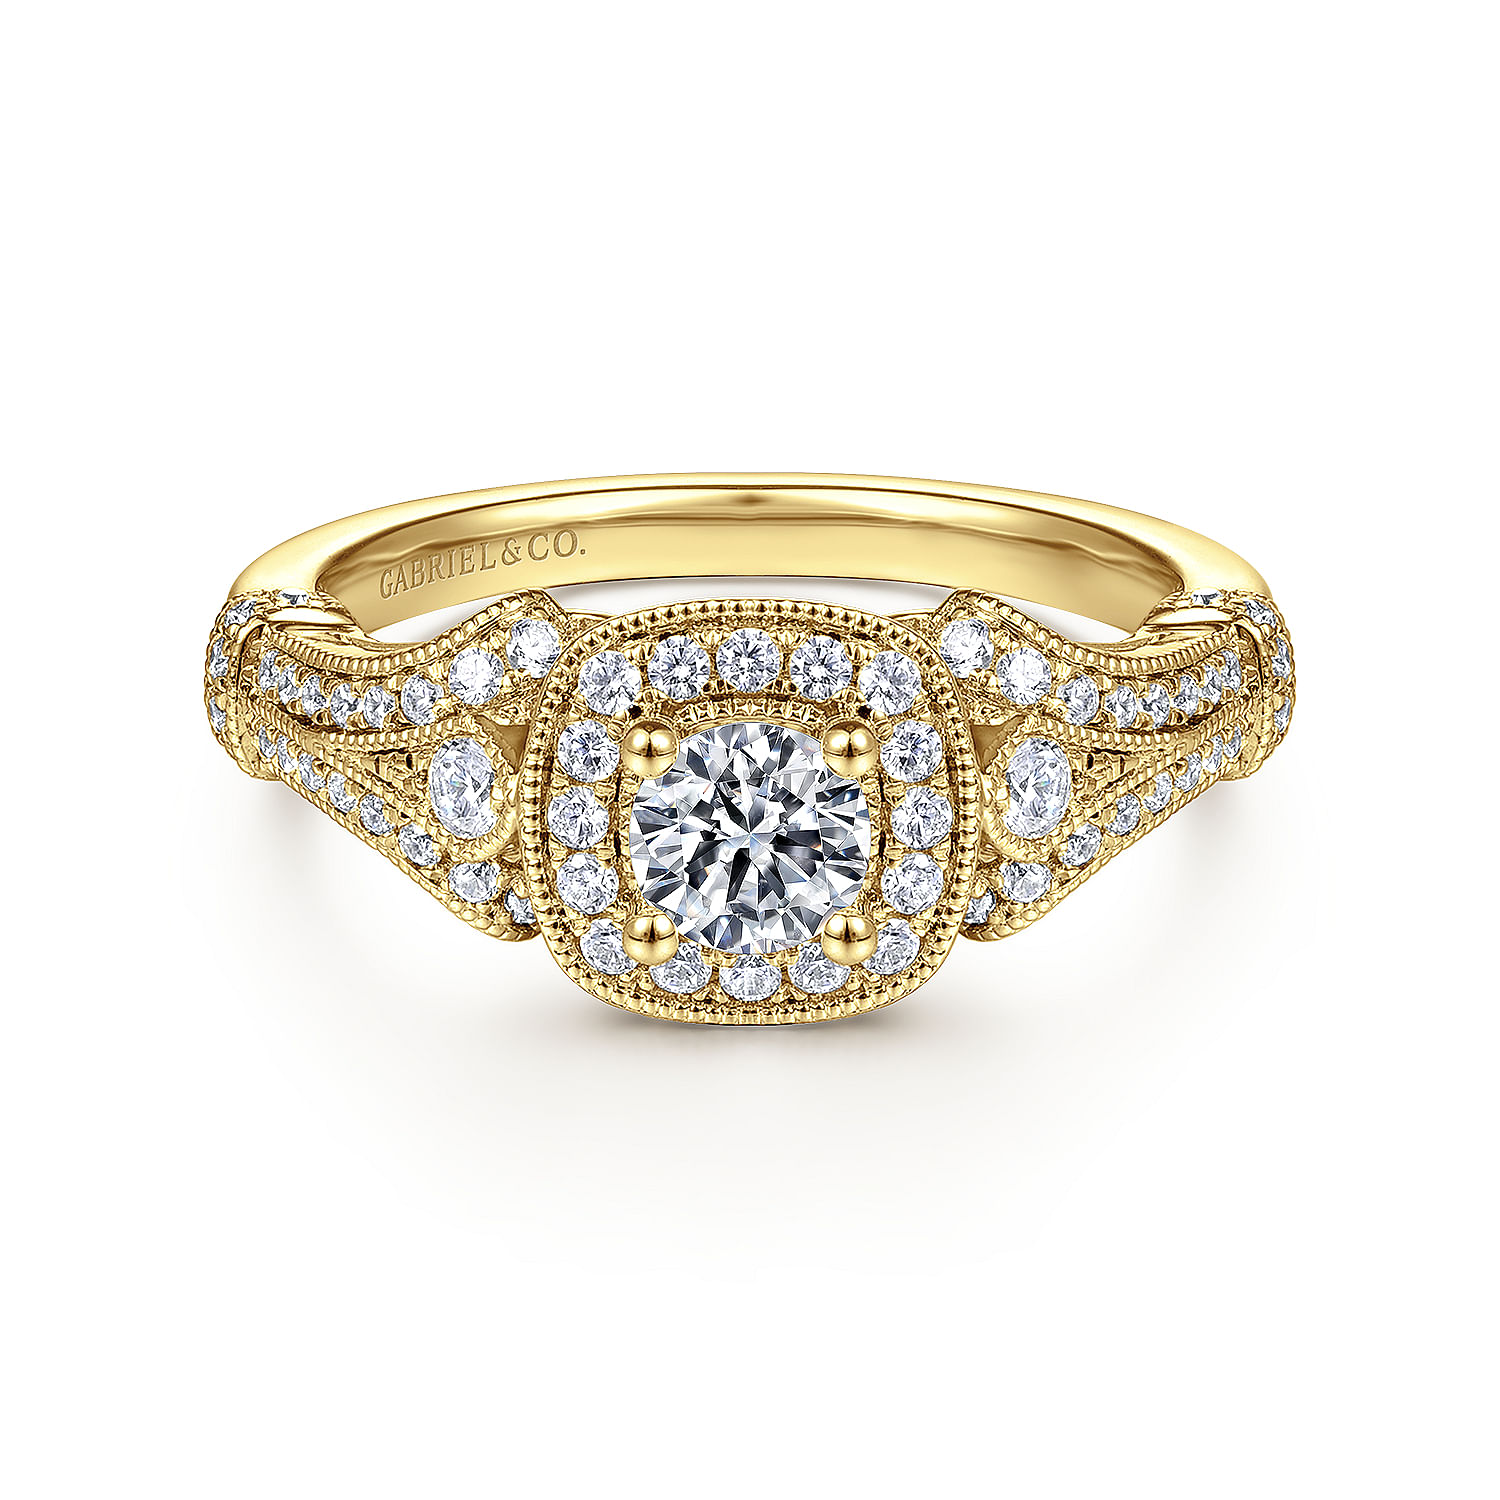 Gabriel - Vintage Inspired 14K Yellow Gold Cushion Halo Round Complete Diamond Engagement Ring